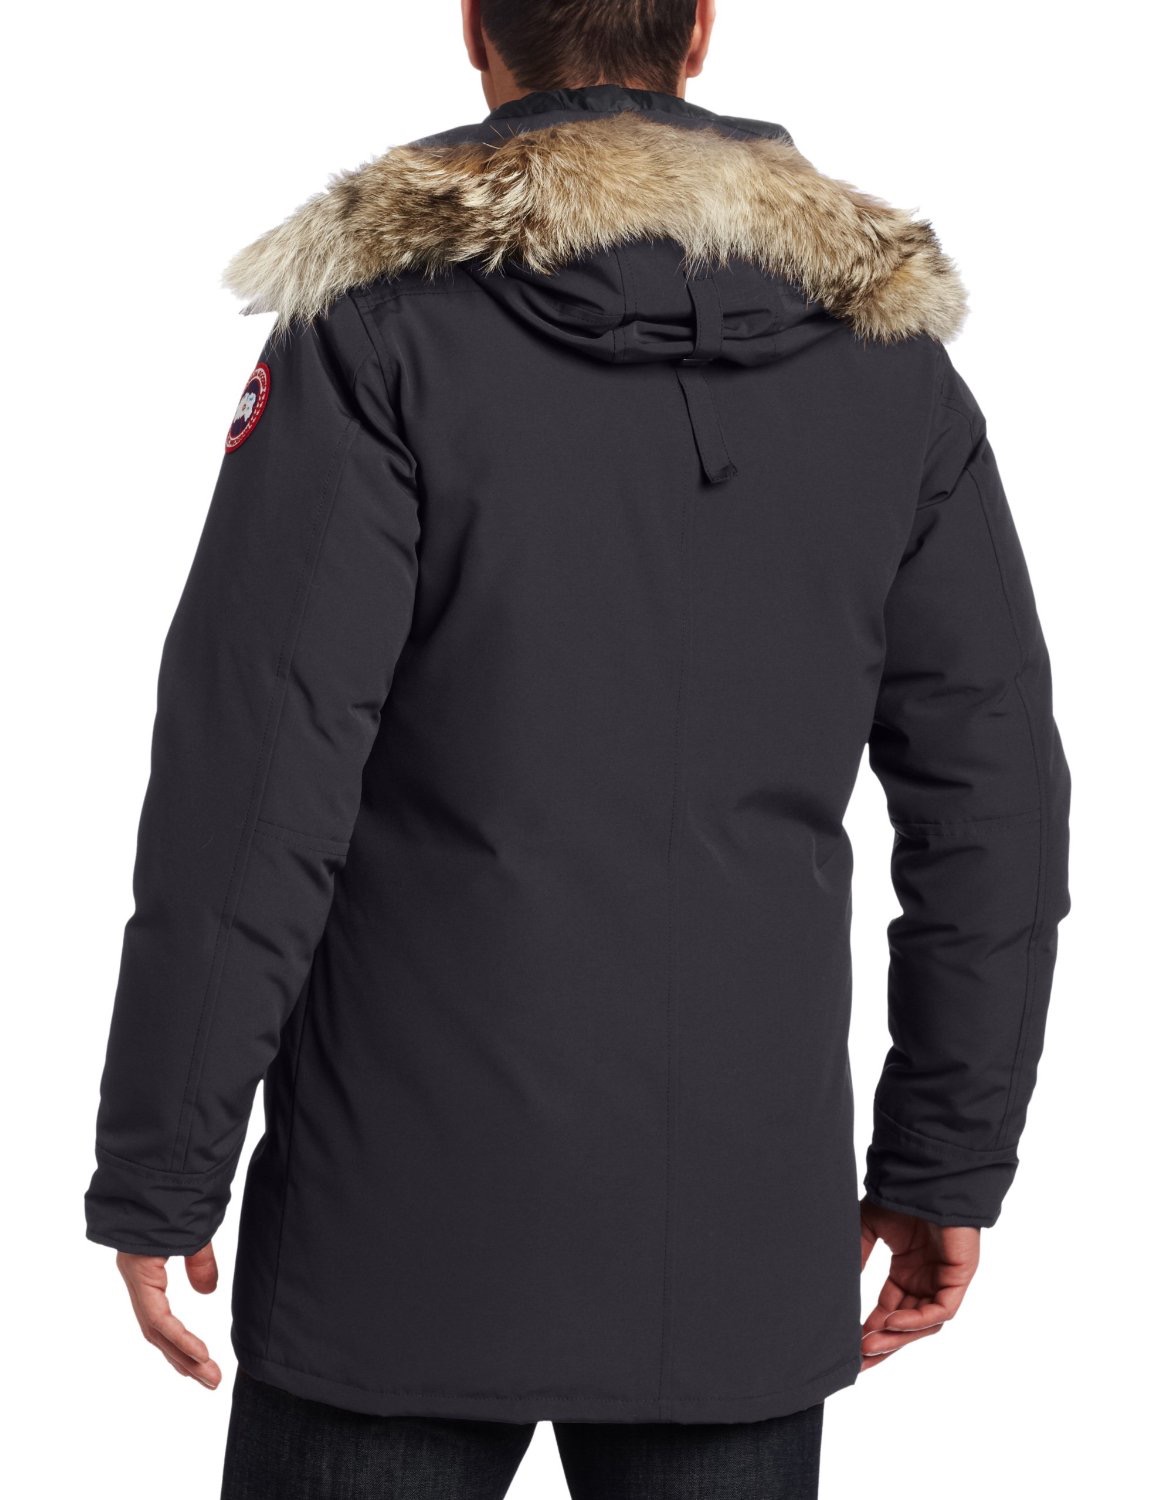 Canada Goose mens outlet price - My Thoughts on Fur and the Irresponsible Plague of Canada Goose ...